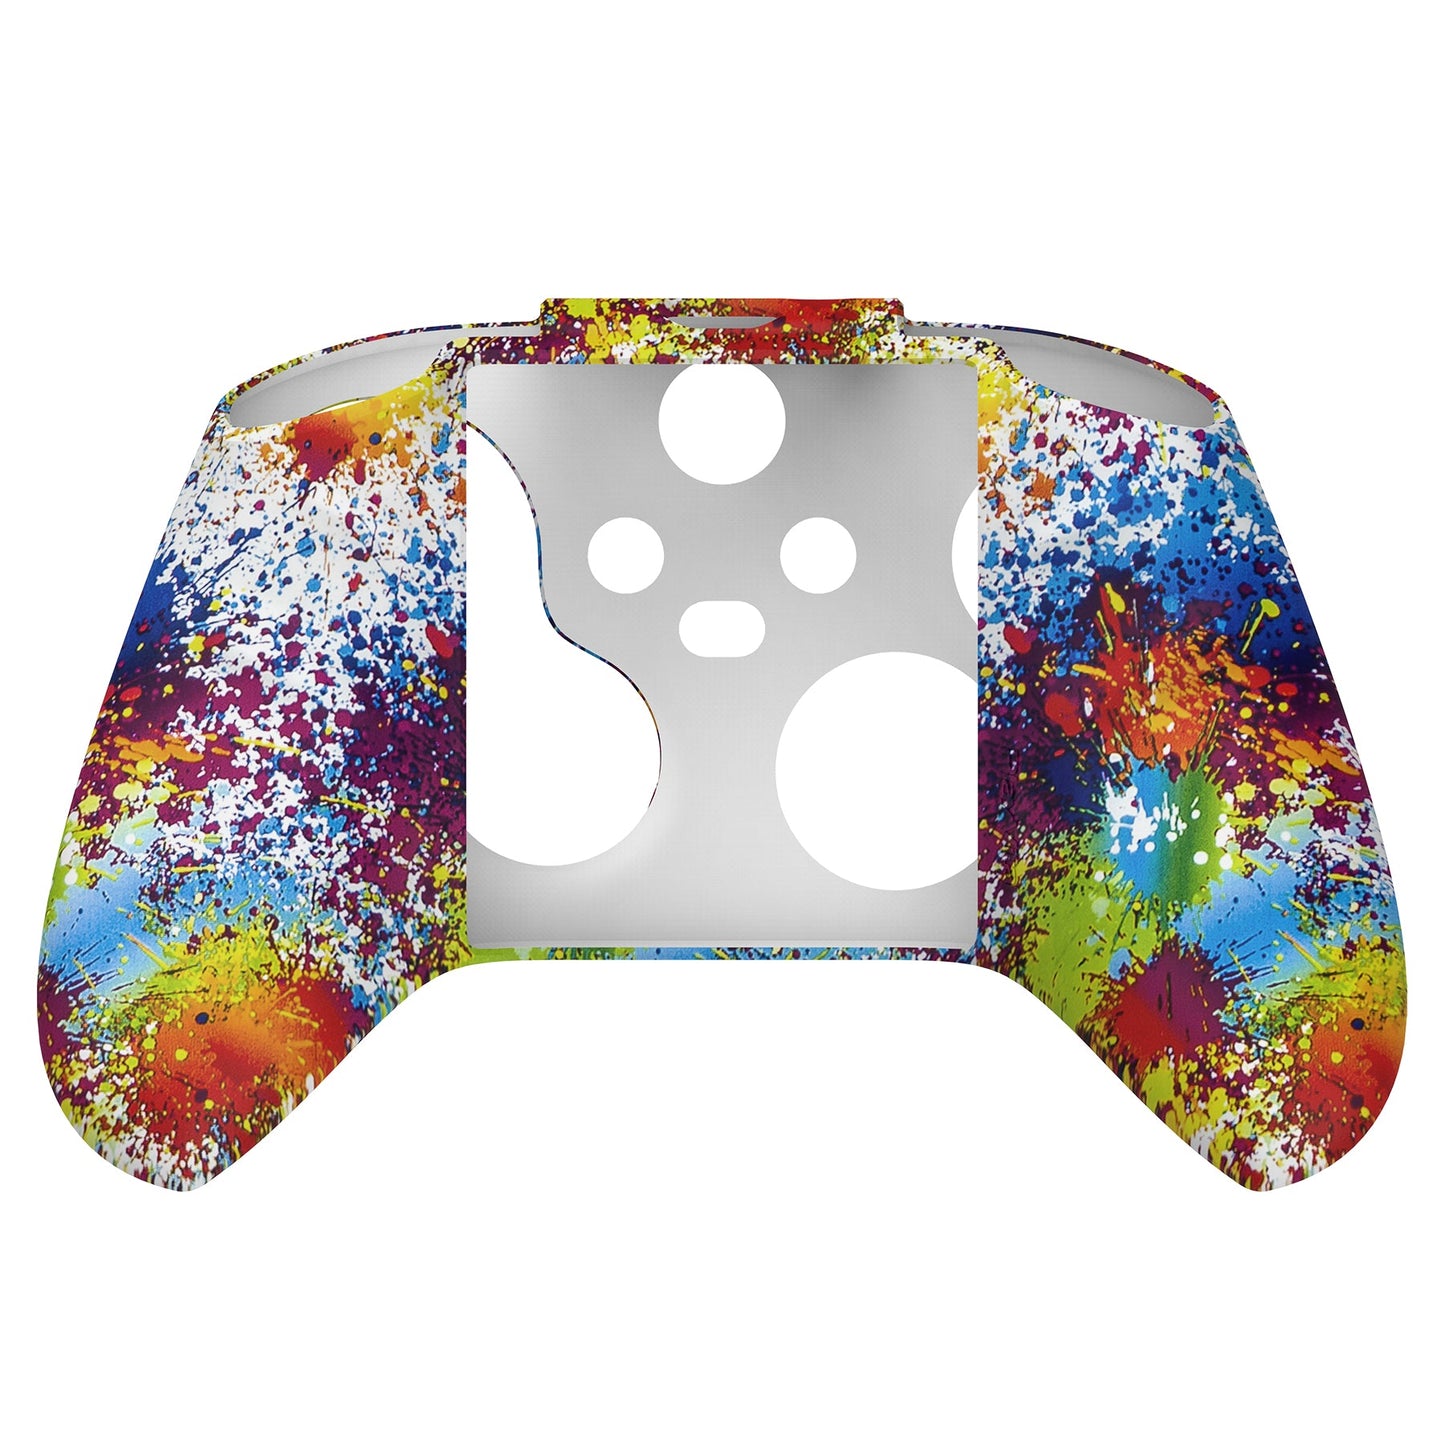 PlayVital Water Transfer Printing Colorful Splash Pattern Silicone Cover Skin for Xbox Series X/S Controller, Soft Rubber Case Protector for Xbox Series X/S, Xbox Core Controller wtih 6 Thumb Grip Caps - BLX3021 PlayVital